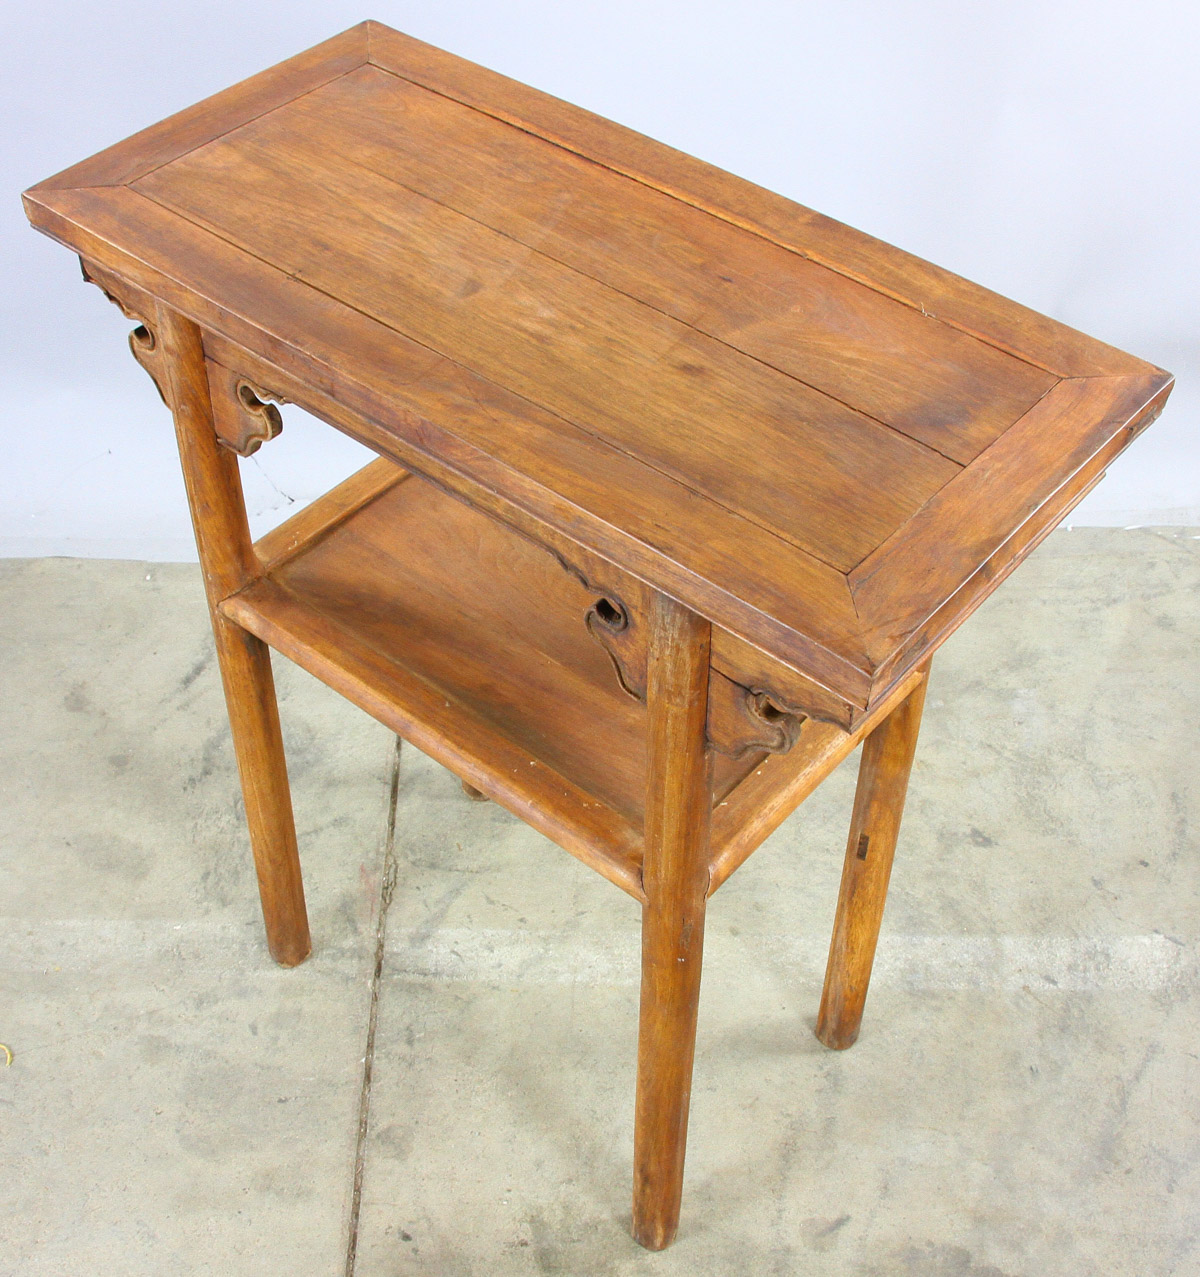 Small Chinese hardwood table, 31" x 13" x 16". - Image 6 of 6